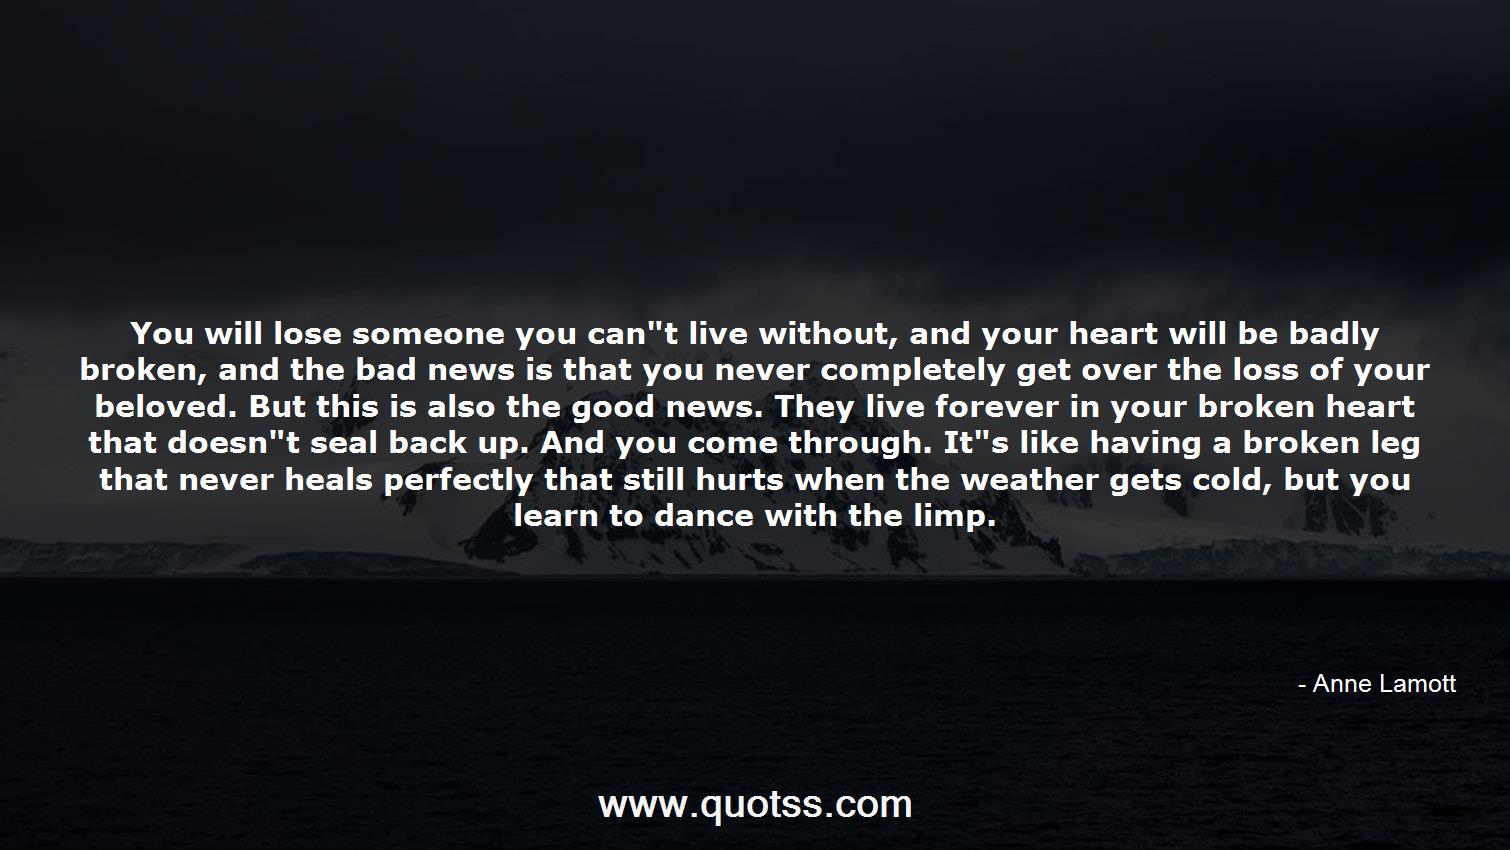 Anne Lamott Quote on Quotss